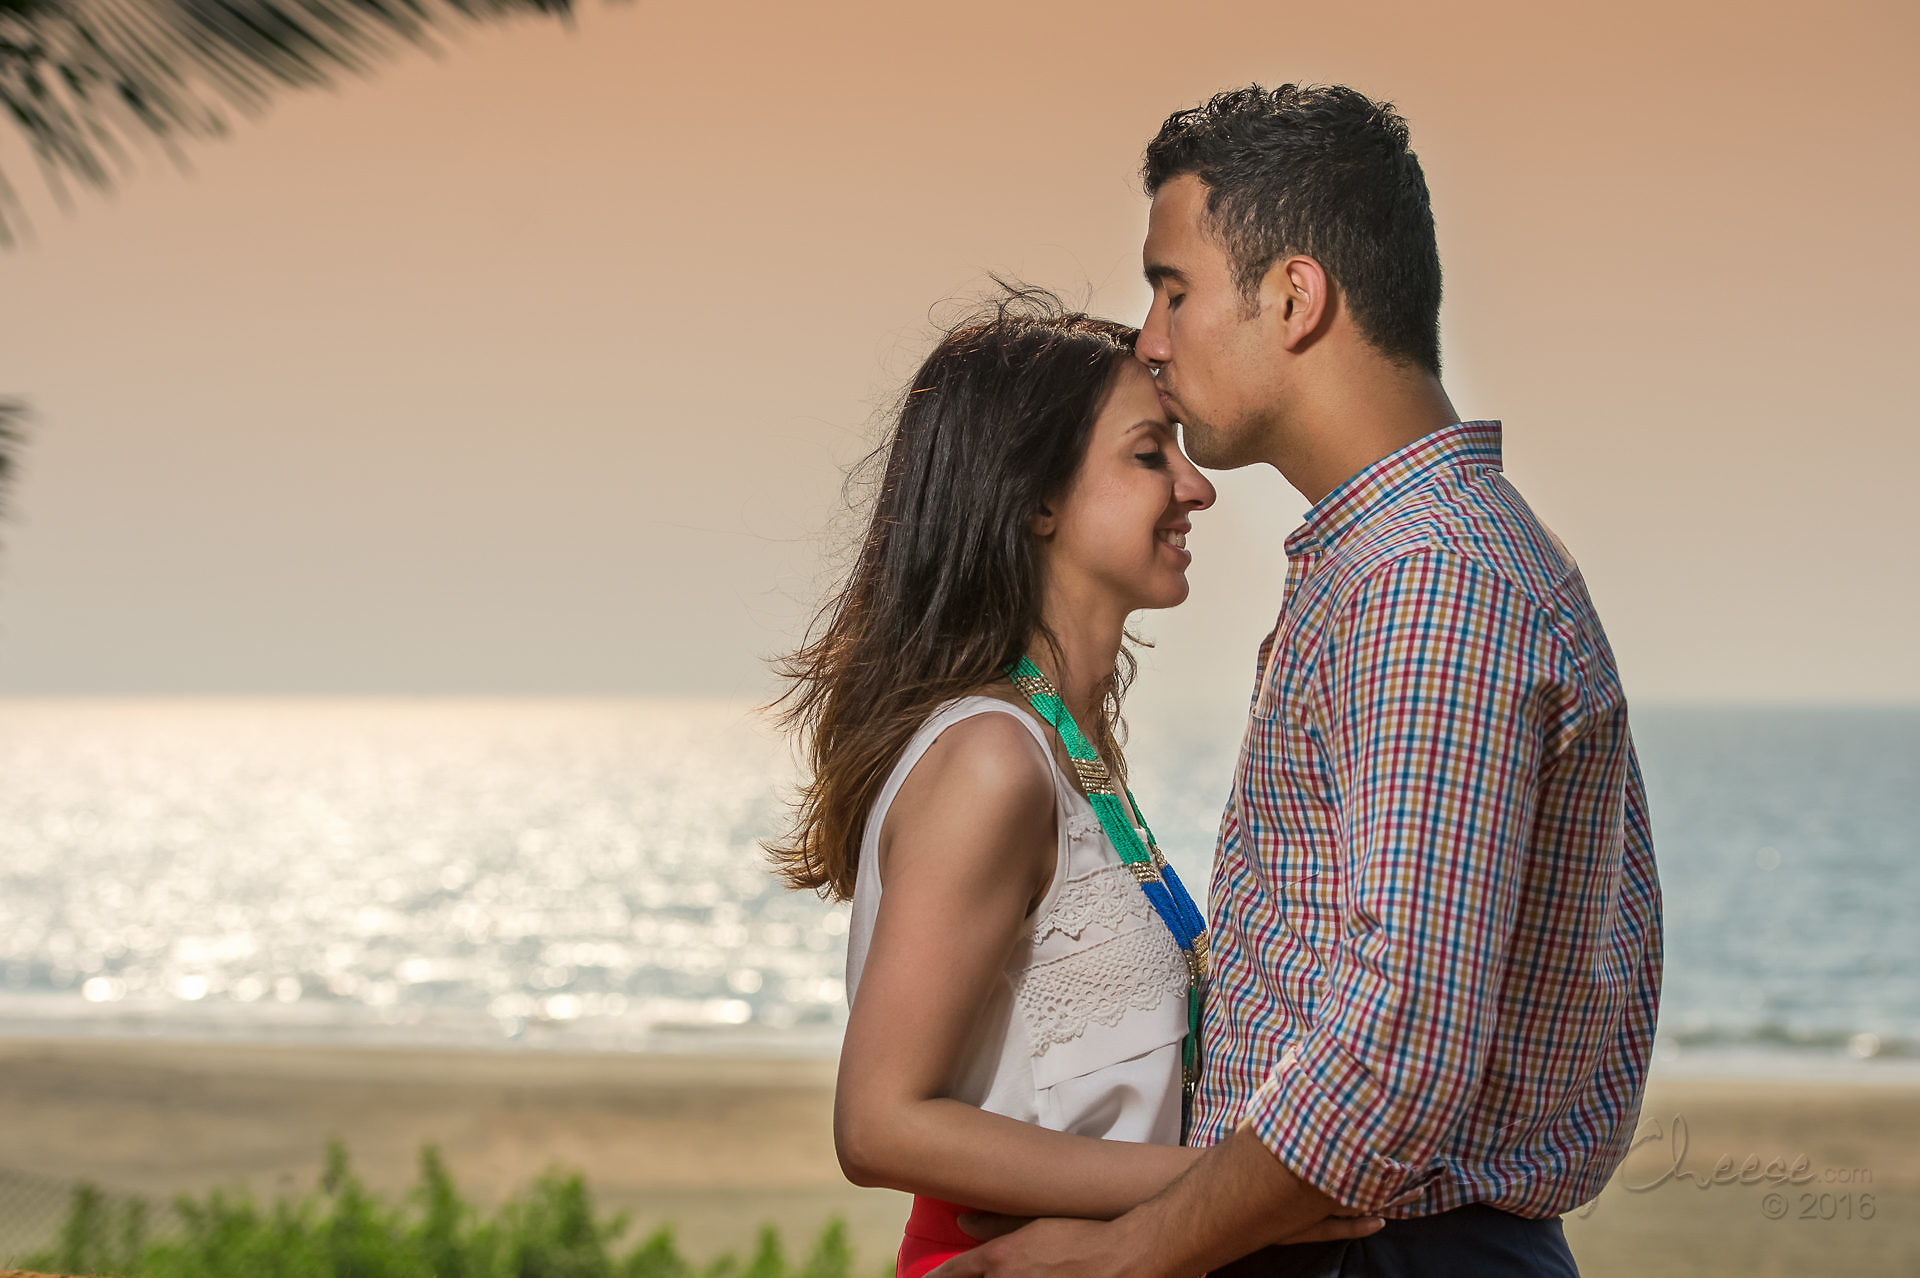 Pre-wedding photoshoot outfits suitable for Goa - Lokaso, your photo friend